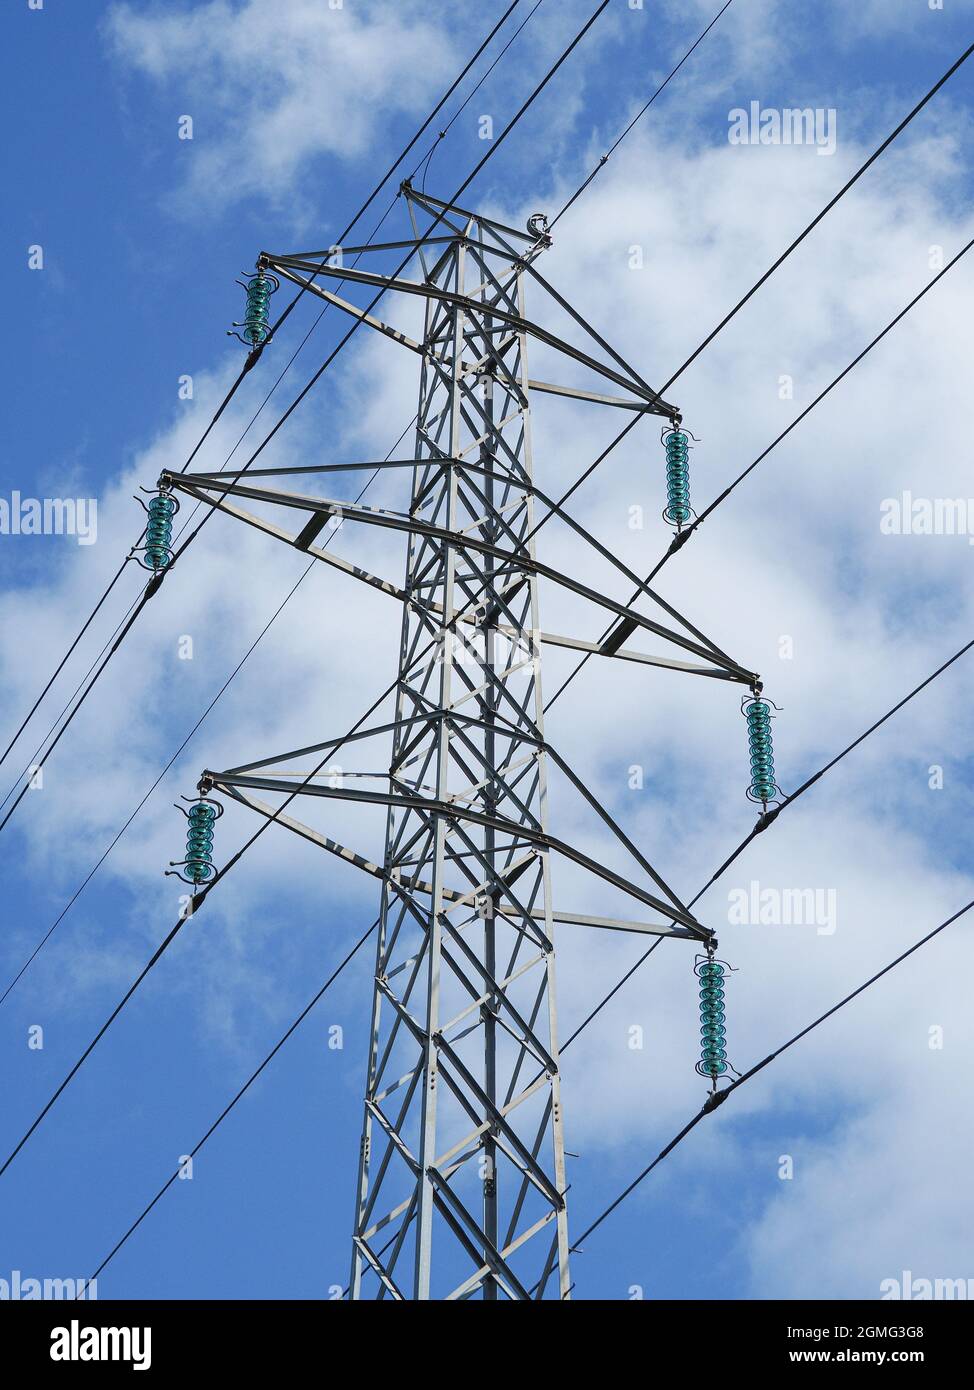 High voltage power lines pylons and electrical cables on a clear blue sky Stock Photo